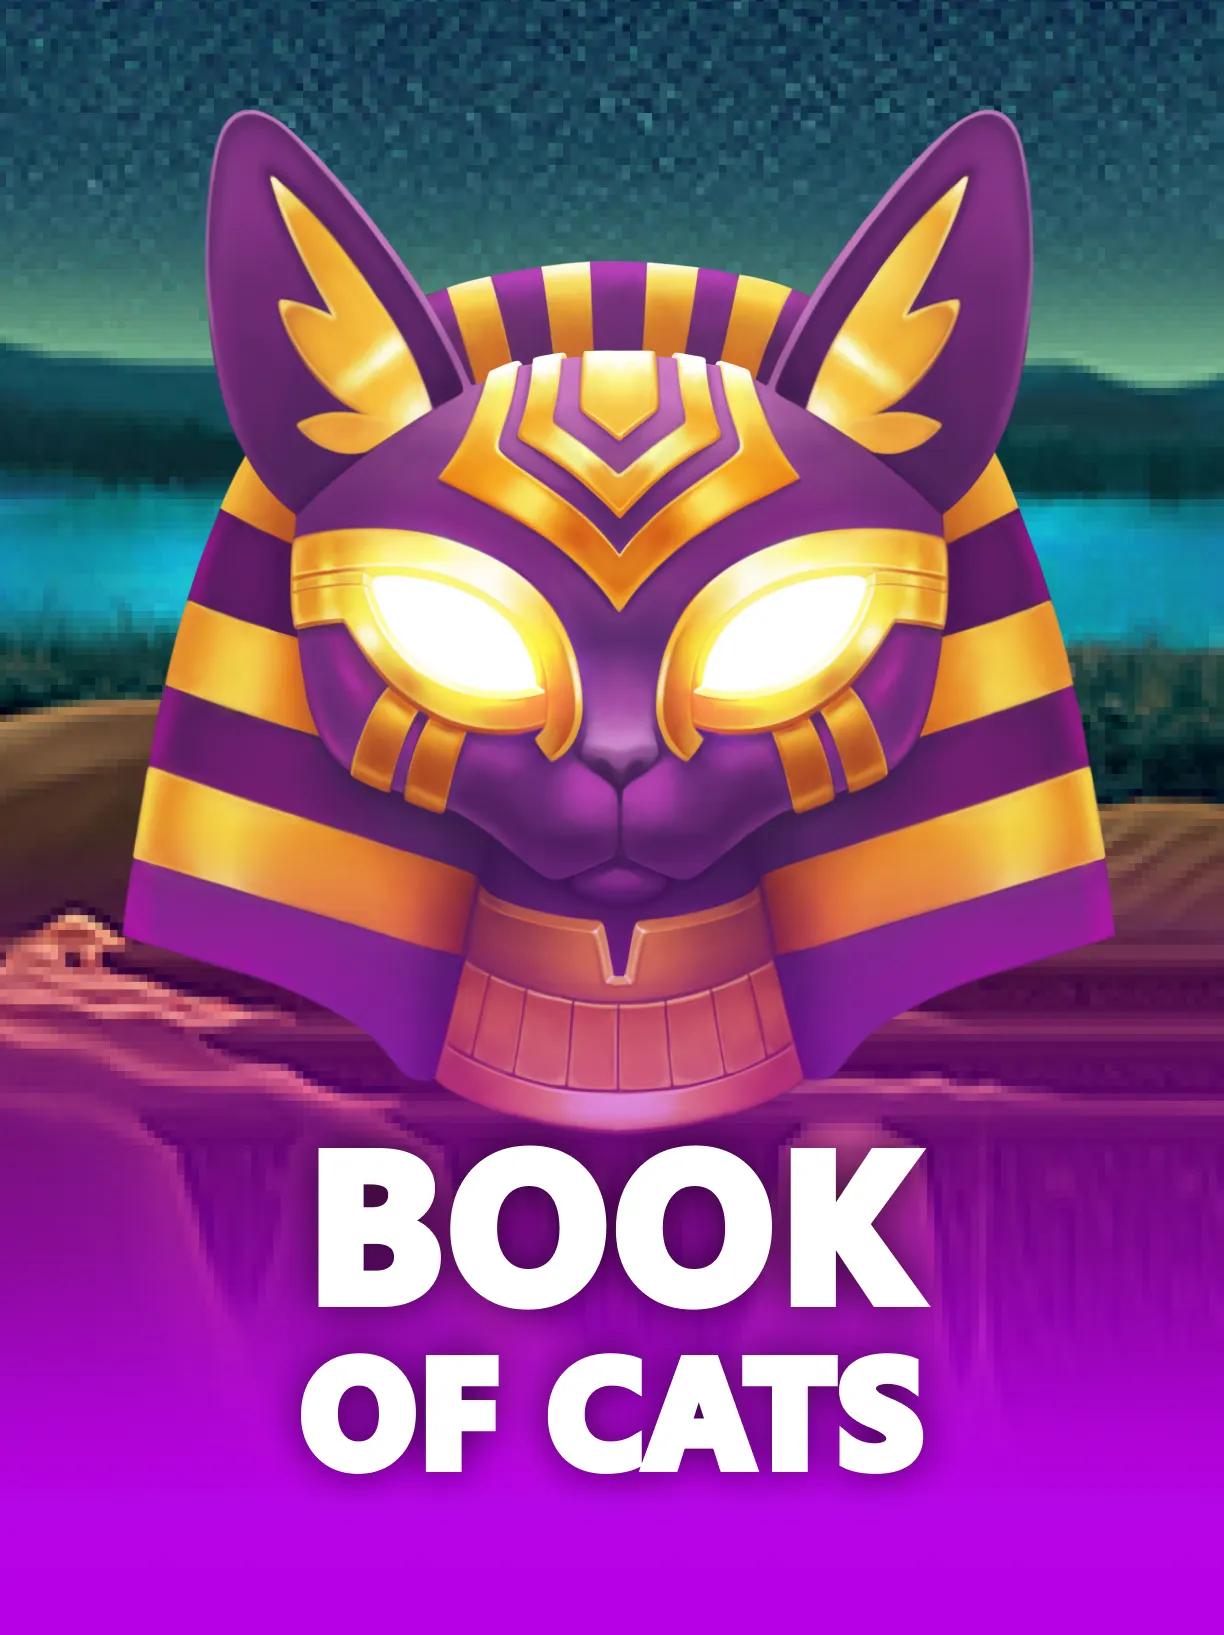 Book_of_Cats_square.webp